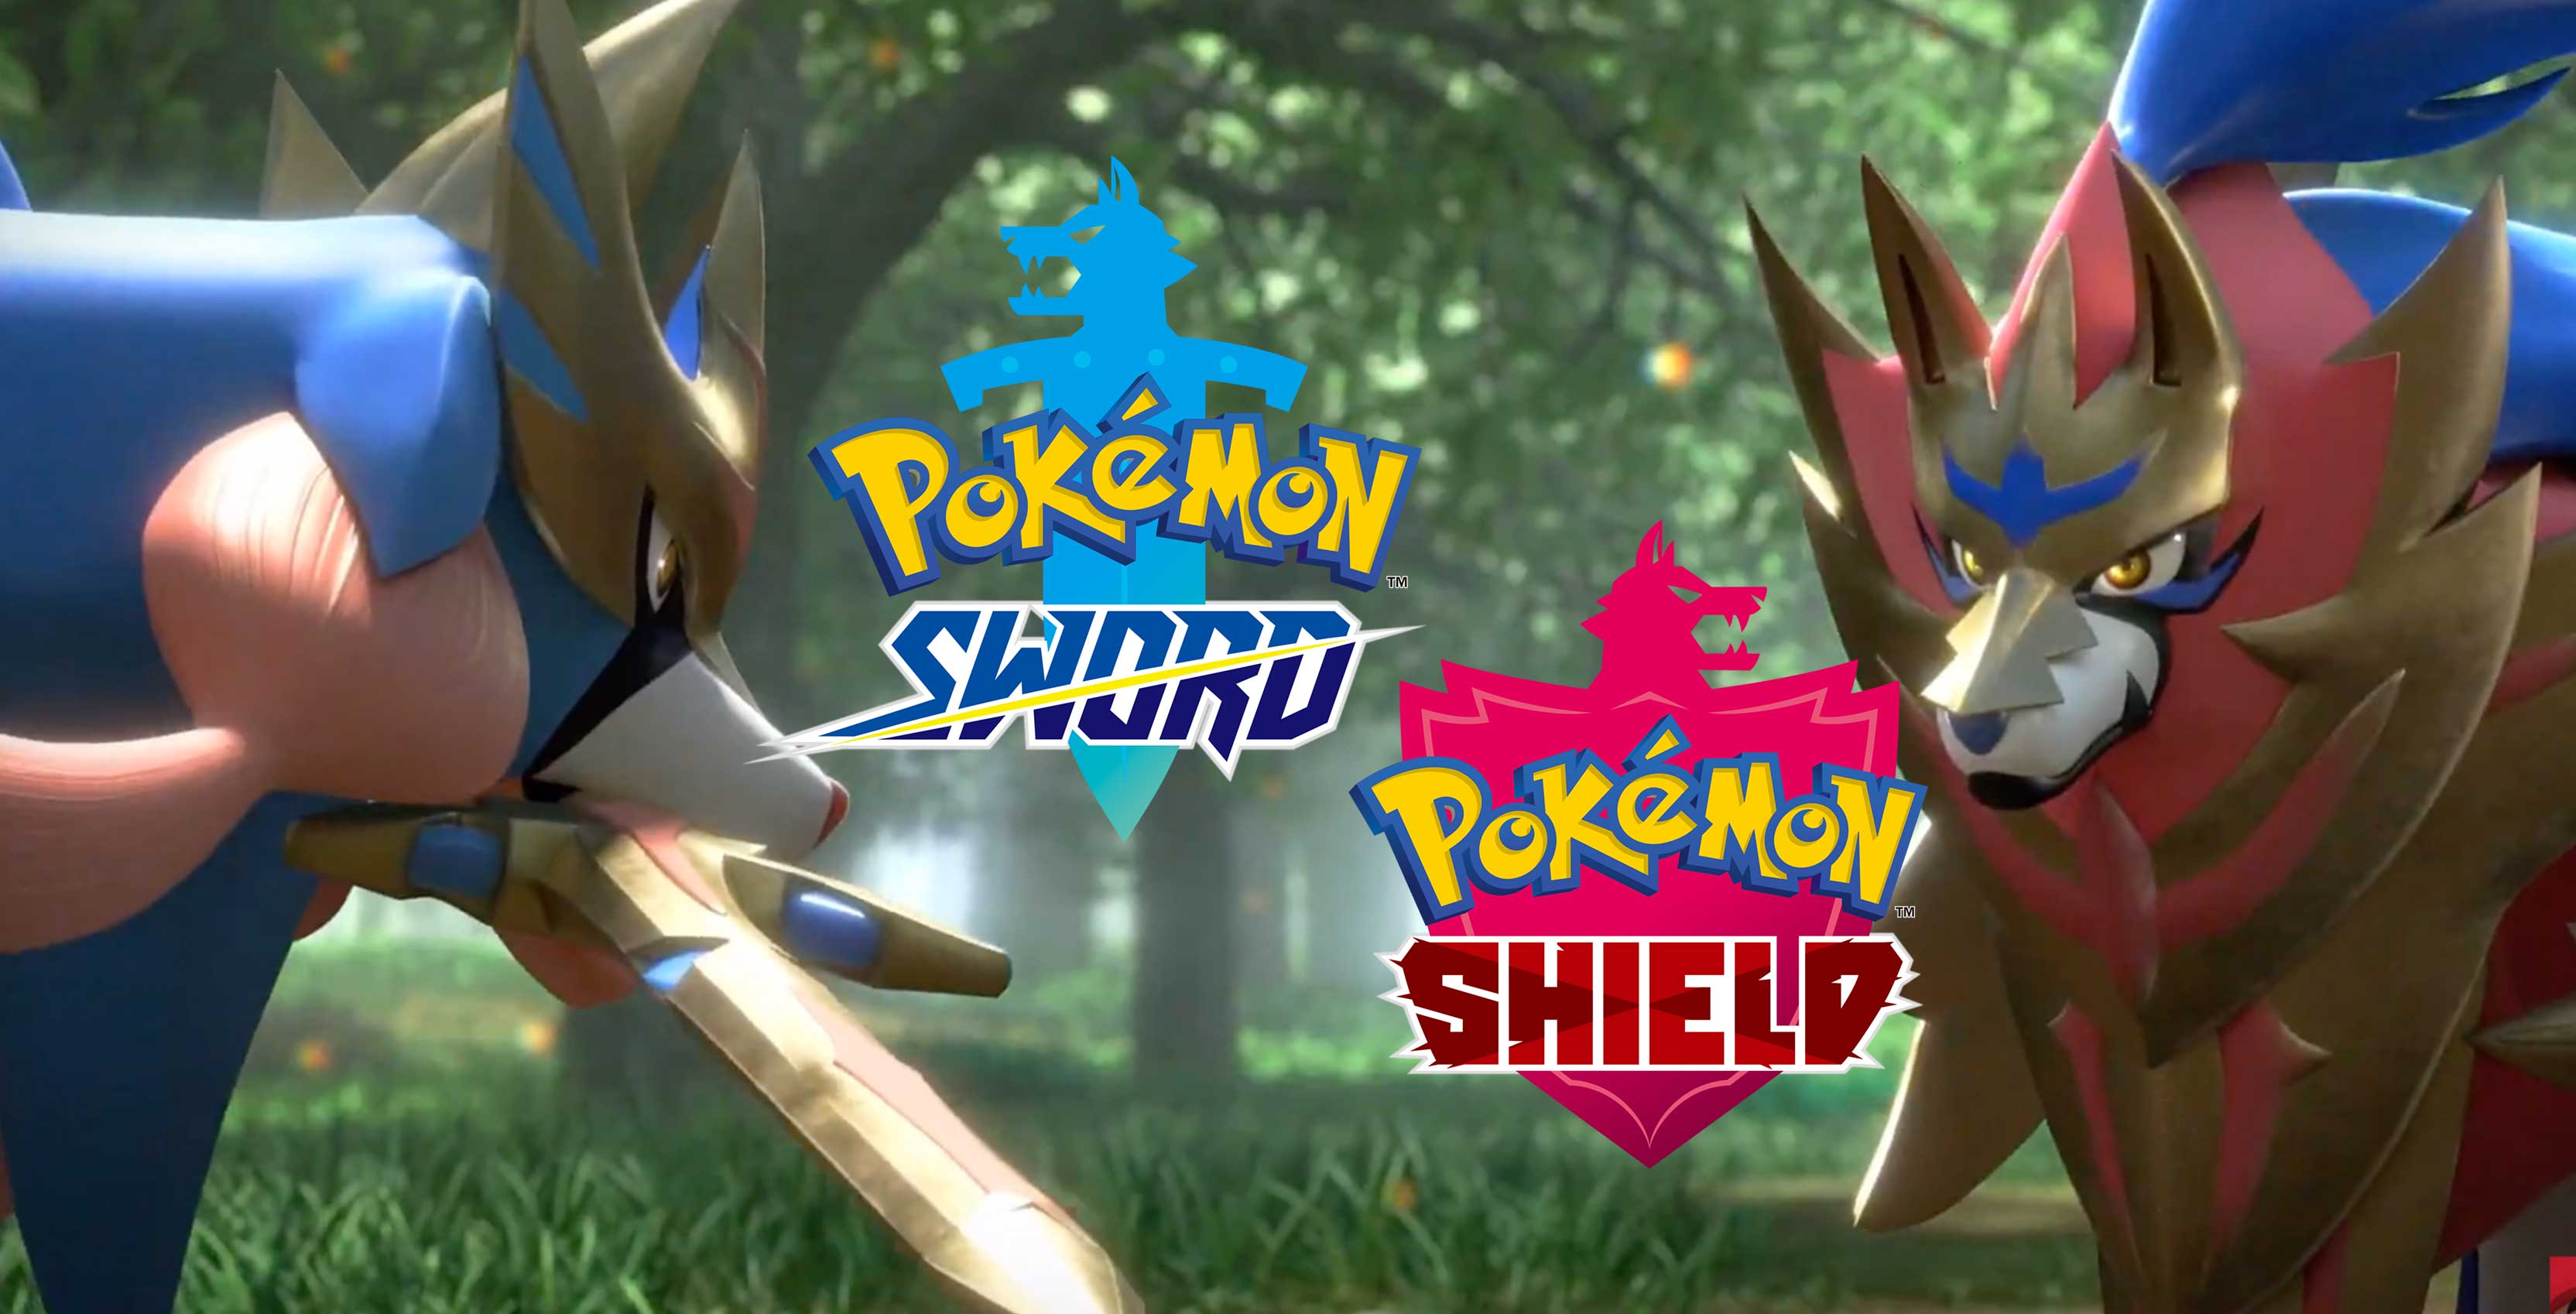 Date of release for pokémon sword and shield